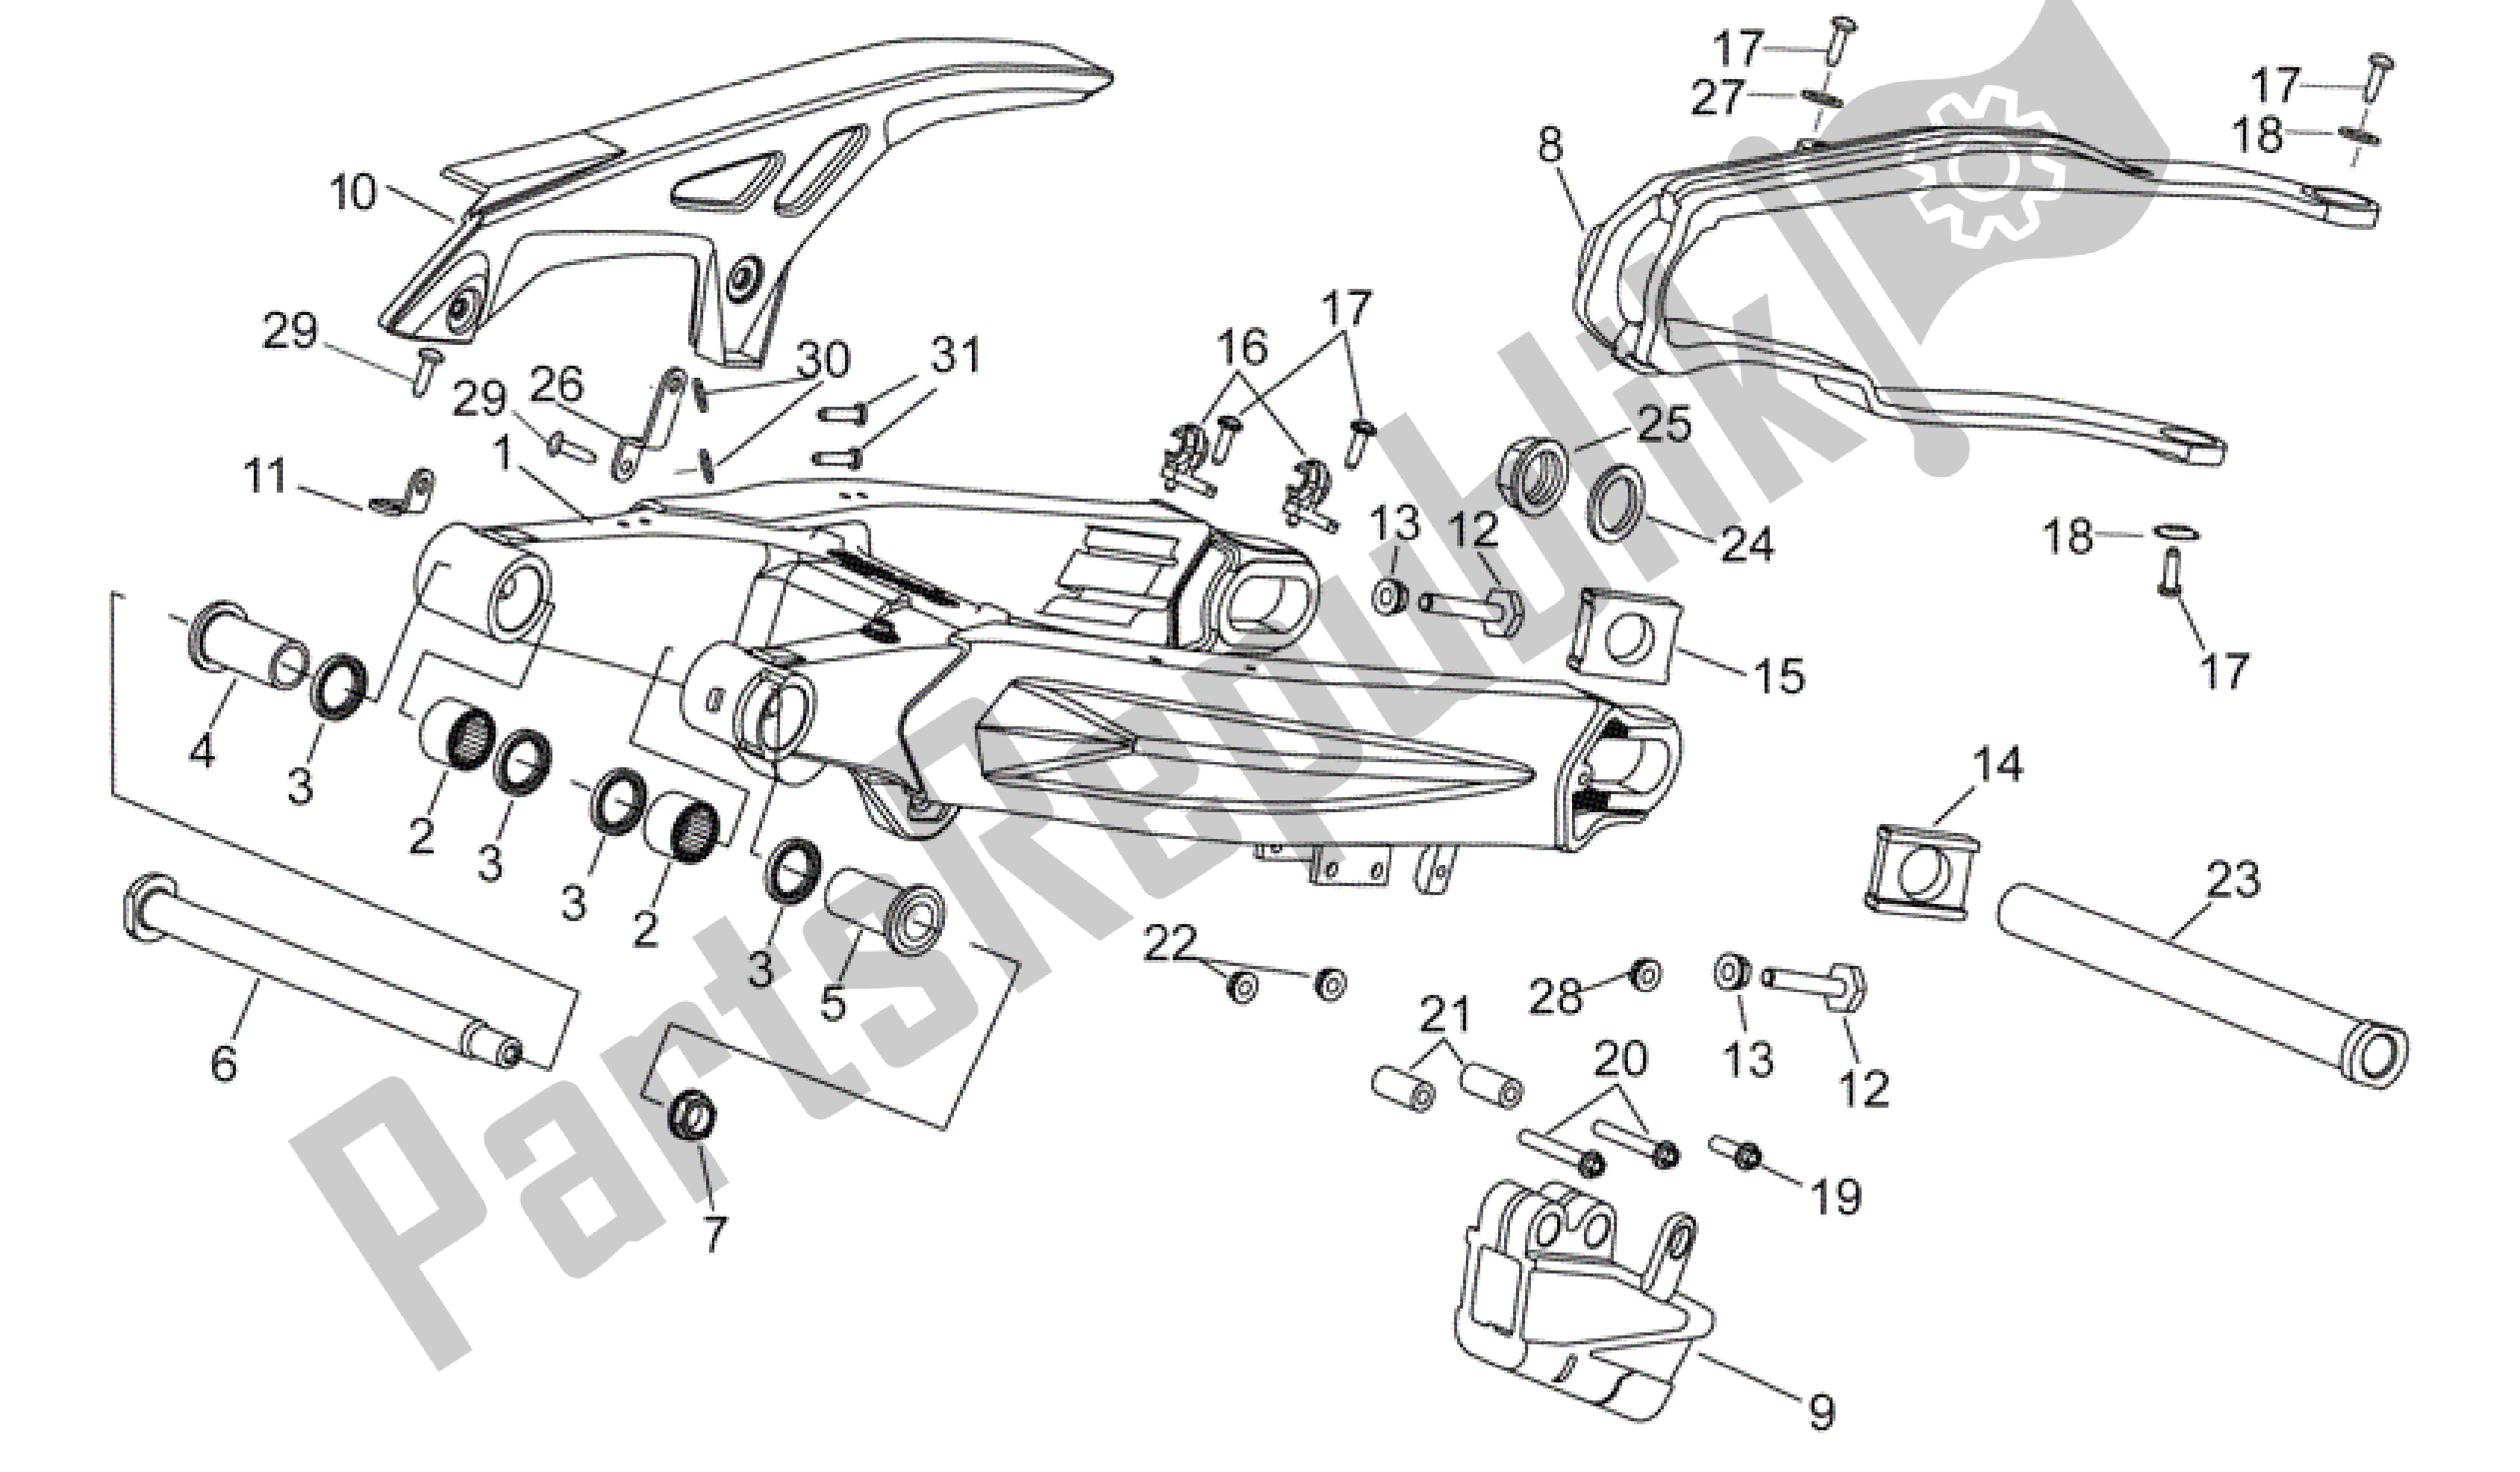 All parts for the Swing Arm of the Aprilia RXV 550 2009 - 2011